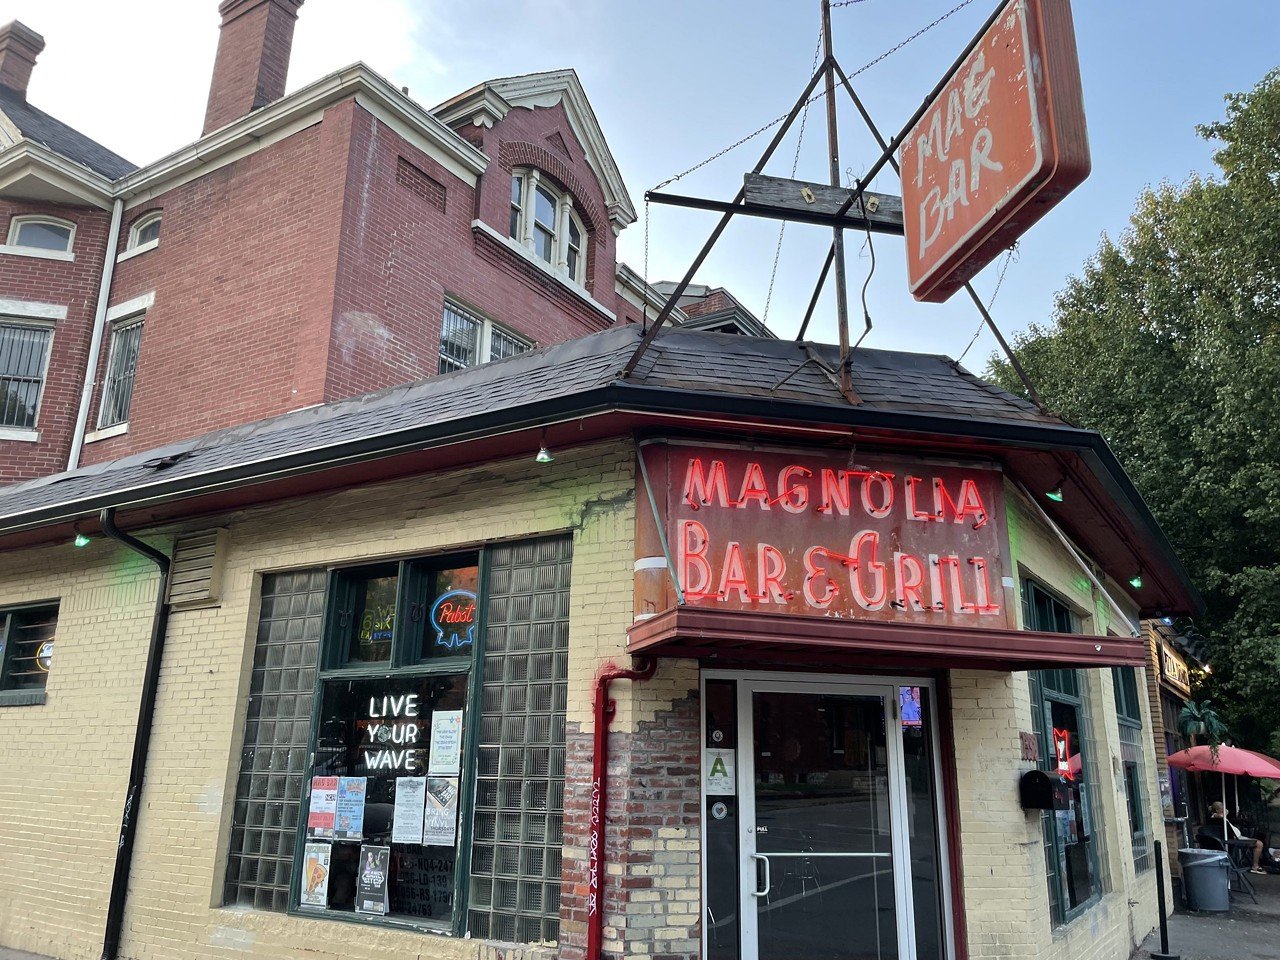 Magnolia Bar 
1398 S. 2nd St.
If you’re ever in Old Louisville, you should stop for a drink at Magnolia Bar, or MagBar, as it’s known to frequent guests. MagBar has a lineup of fun specials and events taking place in the month of June.